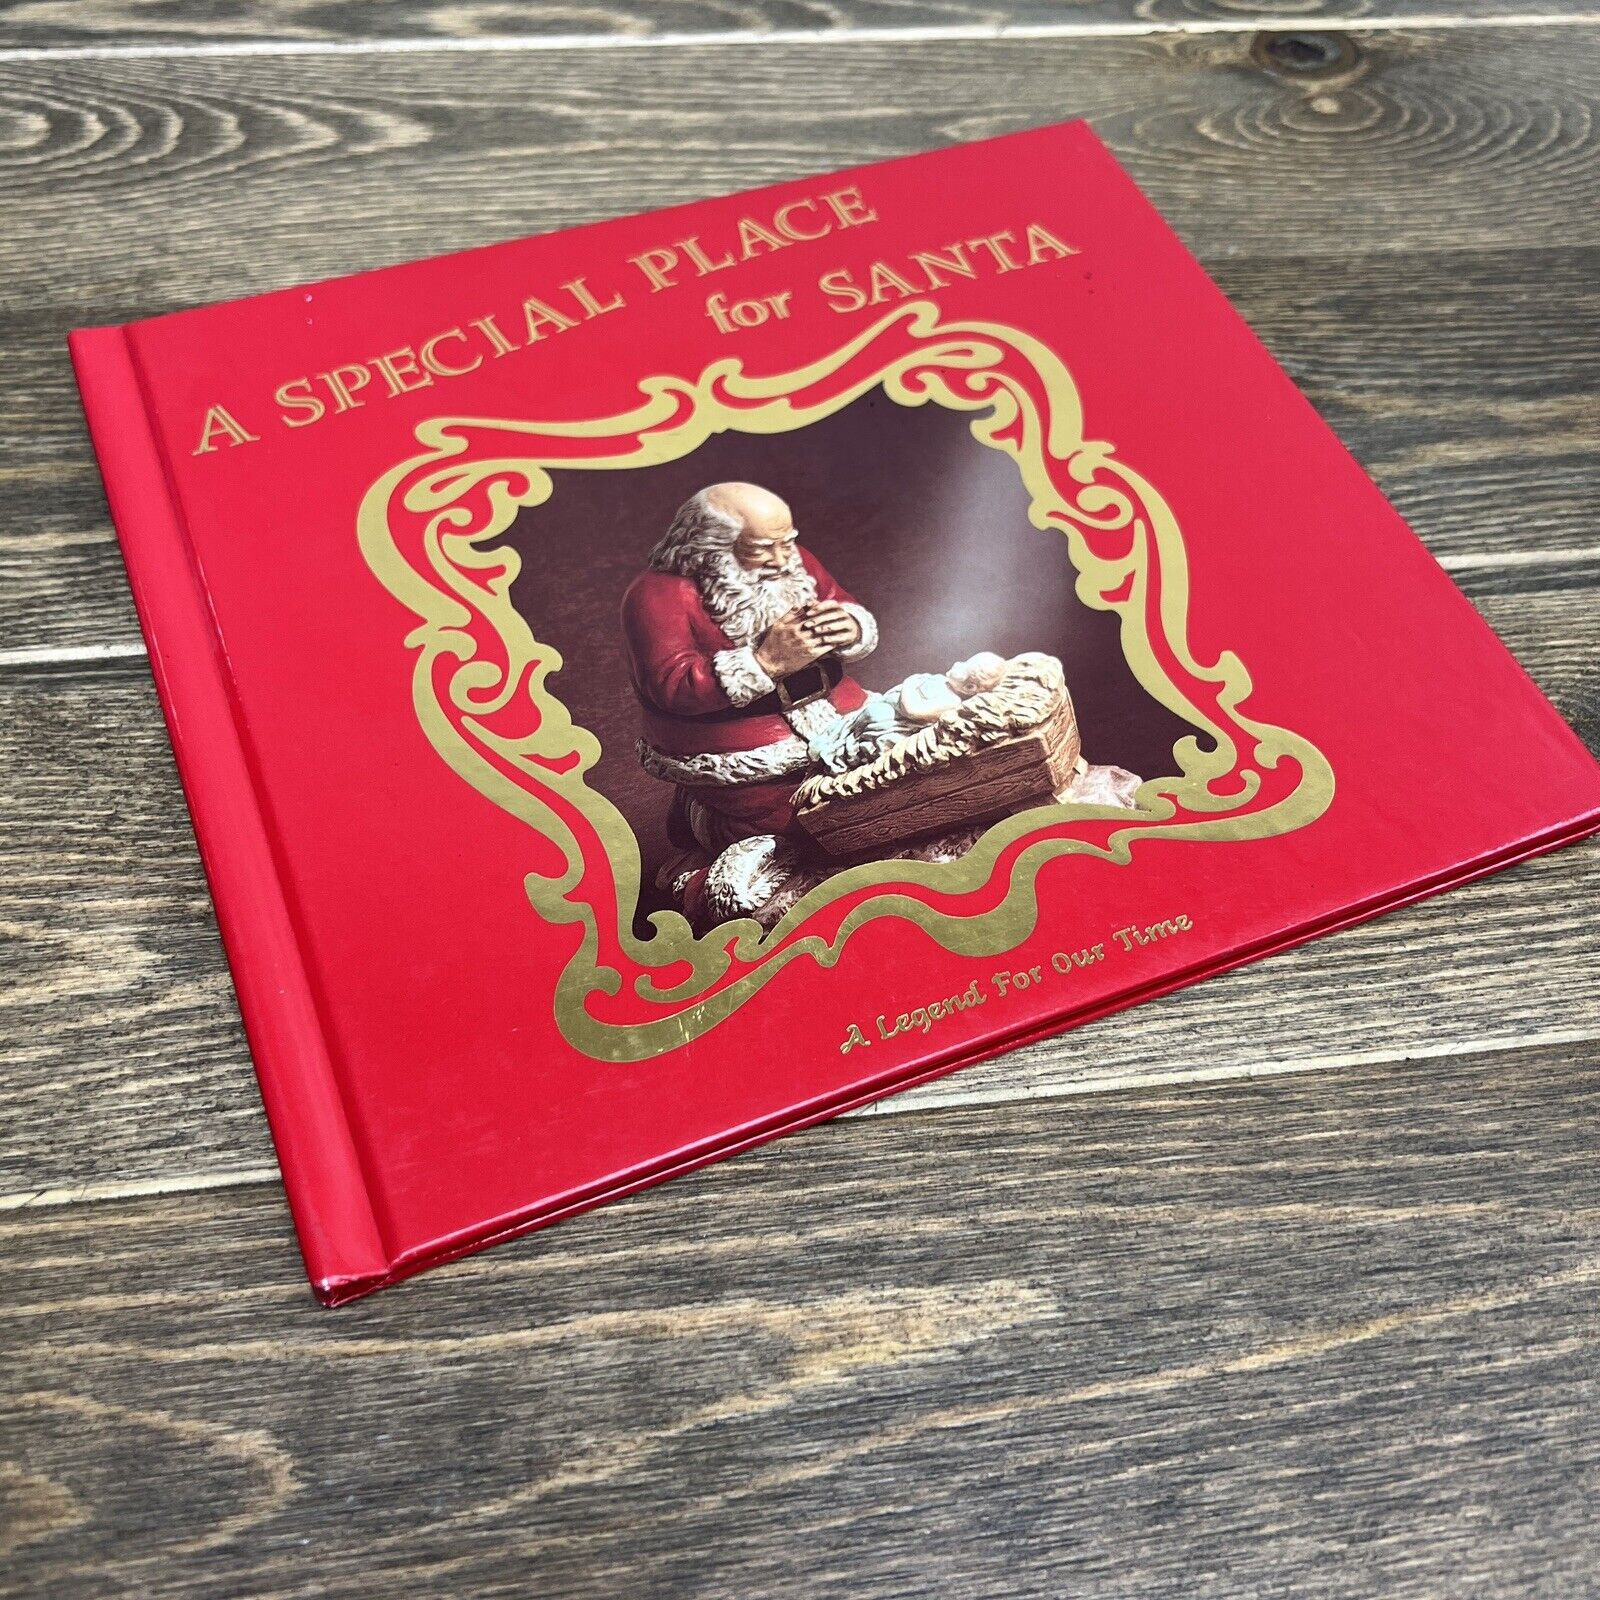 "A Special Place for Santa" Jeanne Pieper 2010 Third Edition Illustrated Roman